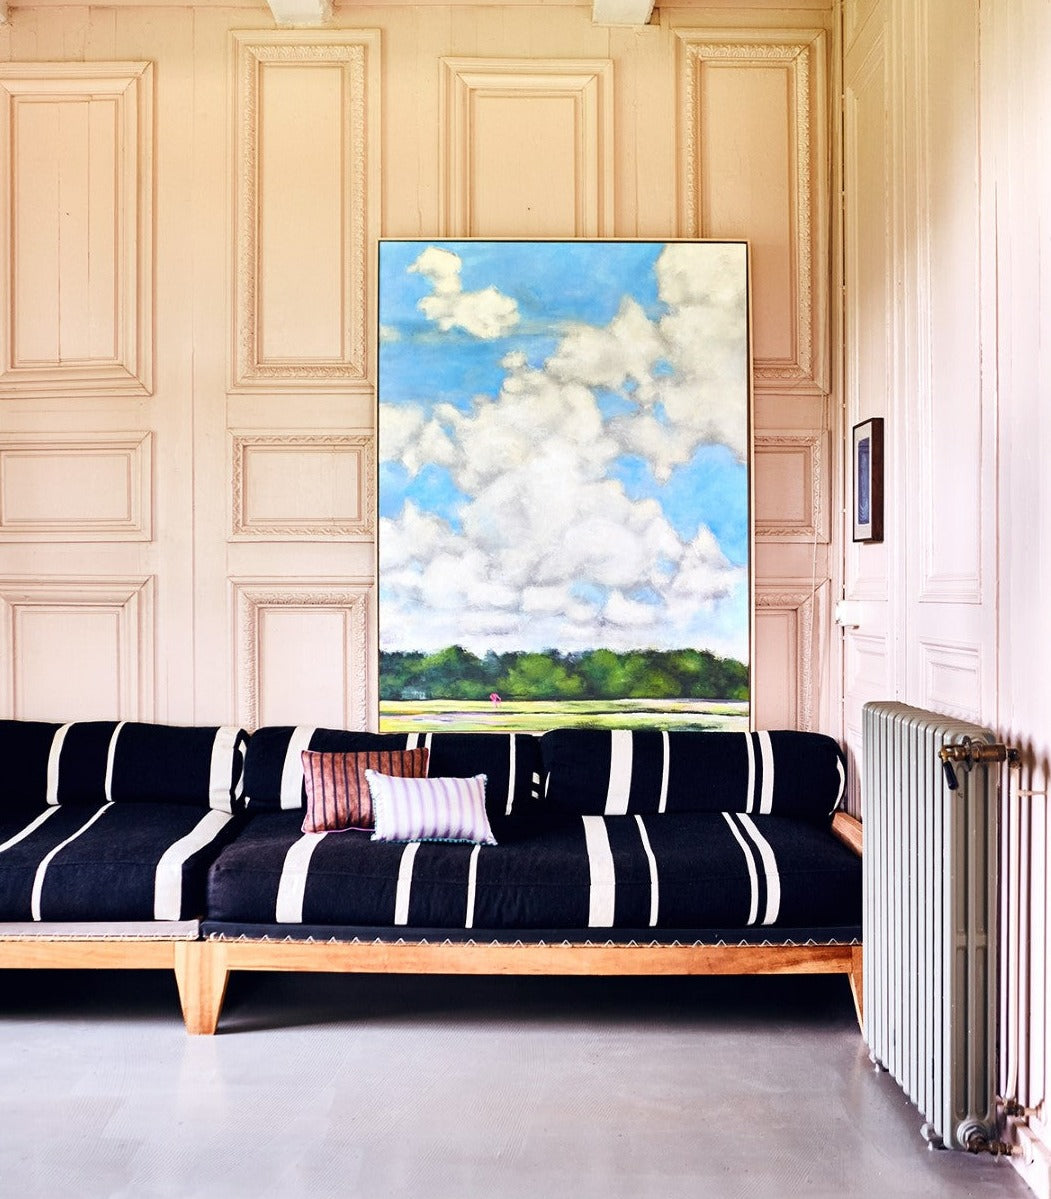 striped sofa with two striped pillows and a large painting of a sky with clouds in an ash wooden frame